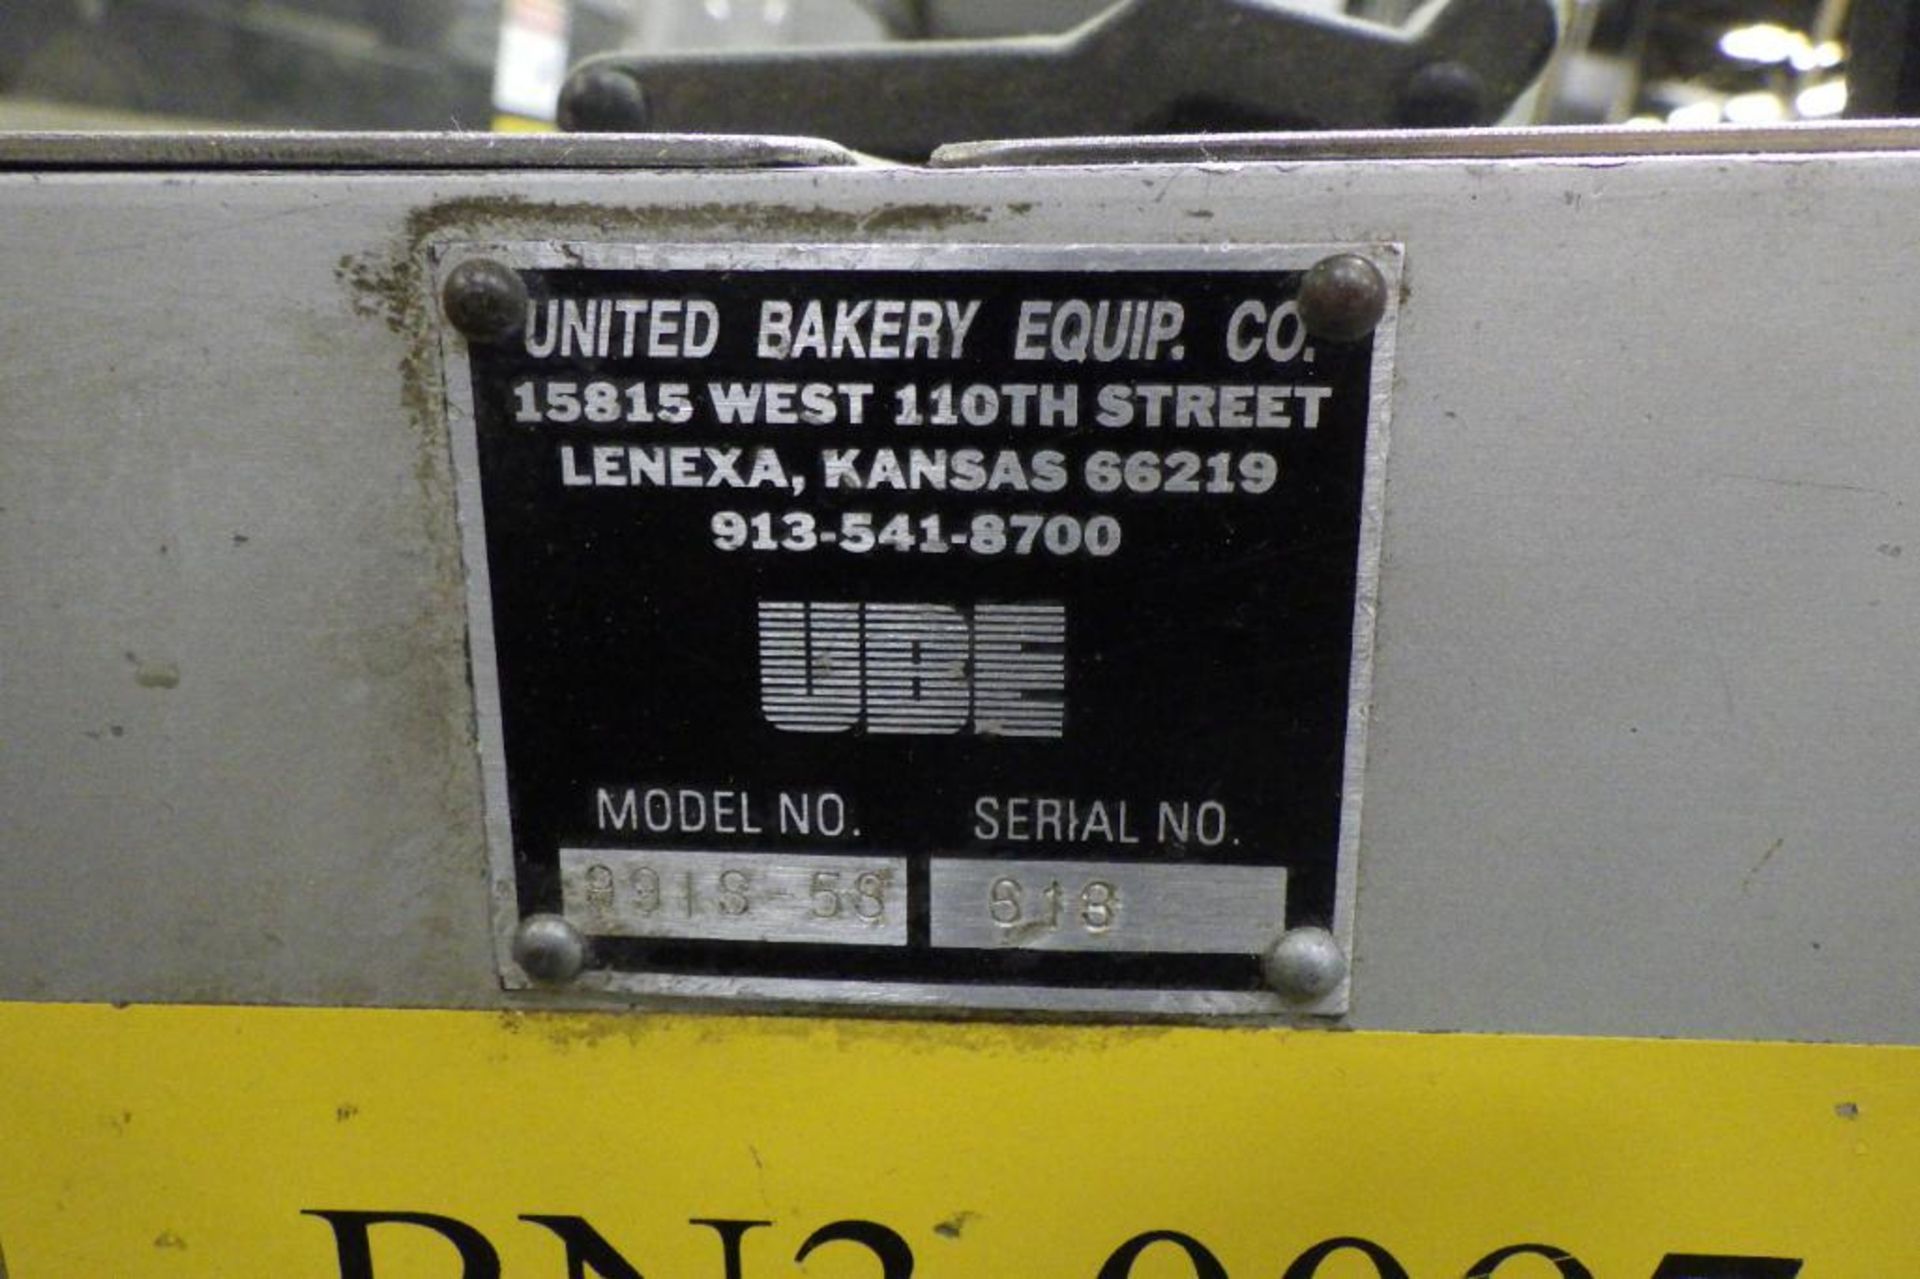 UBE slicing and bagging line - Image 23 of 63